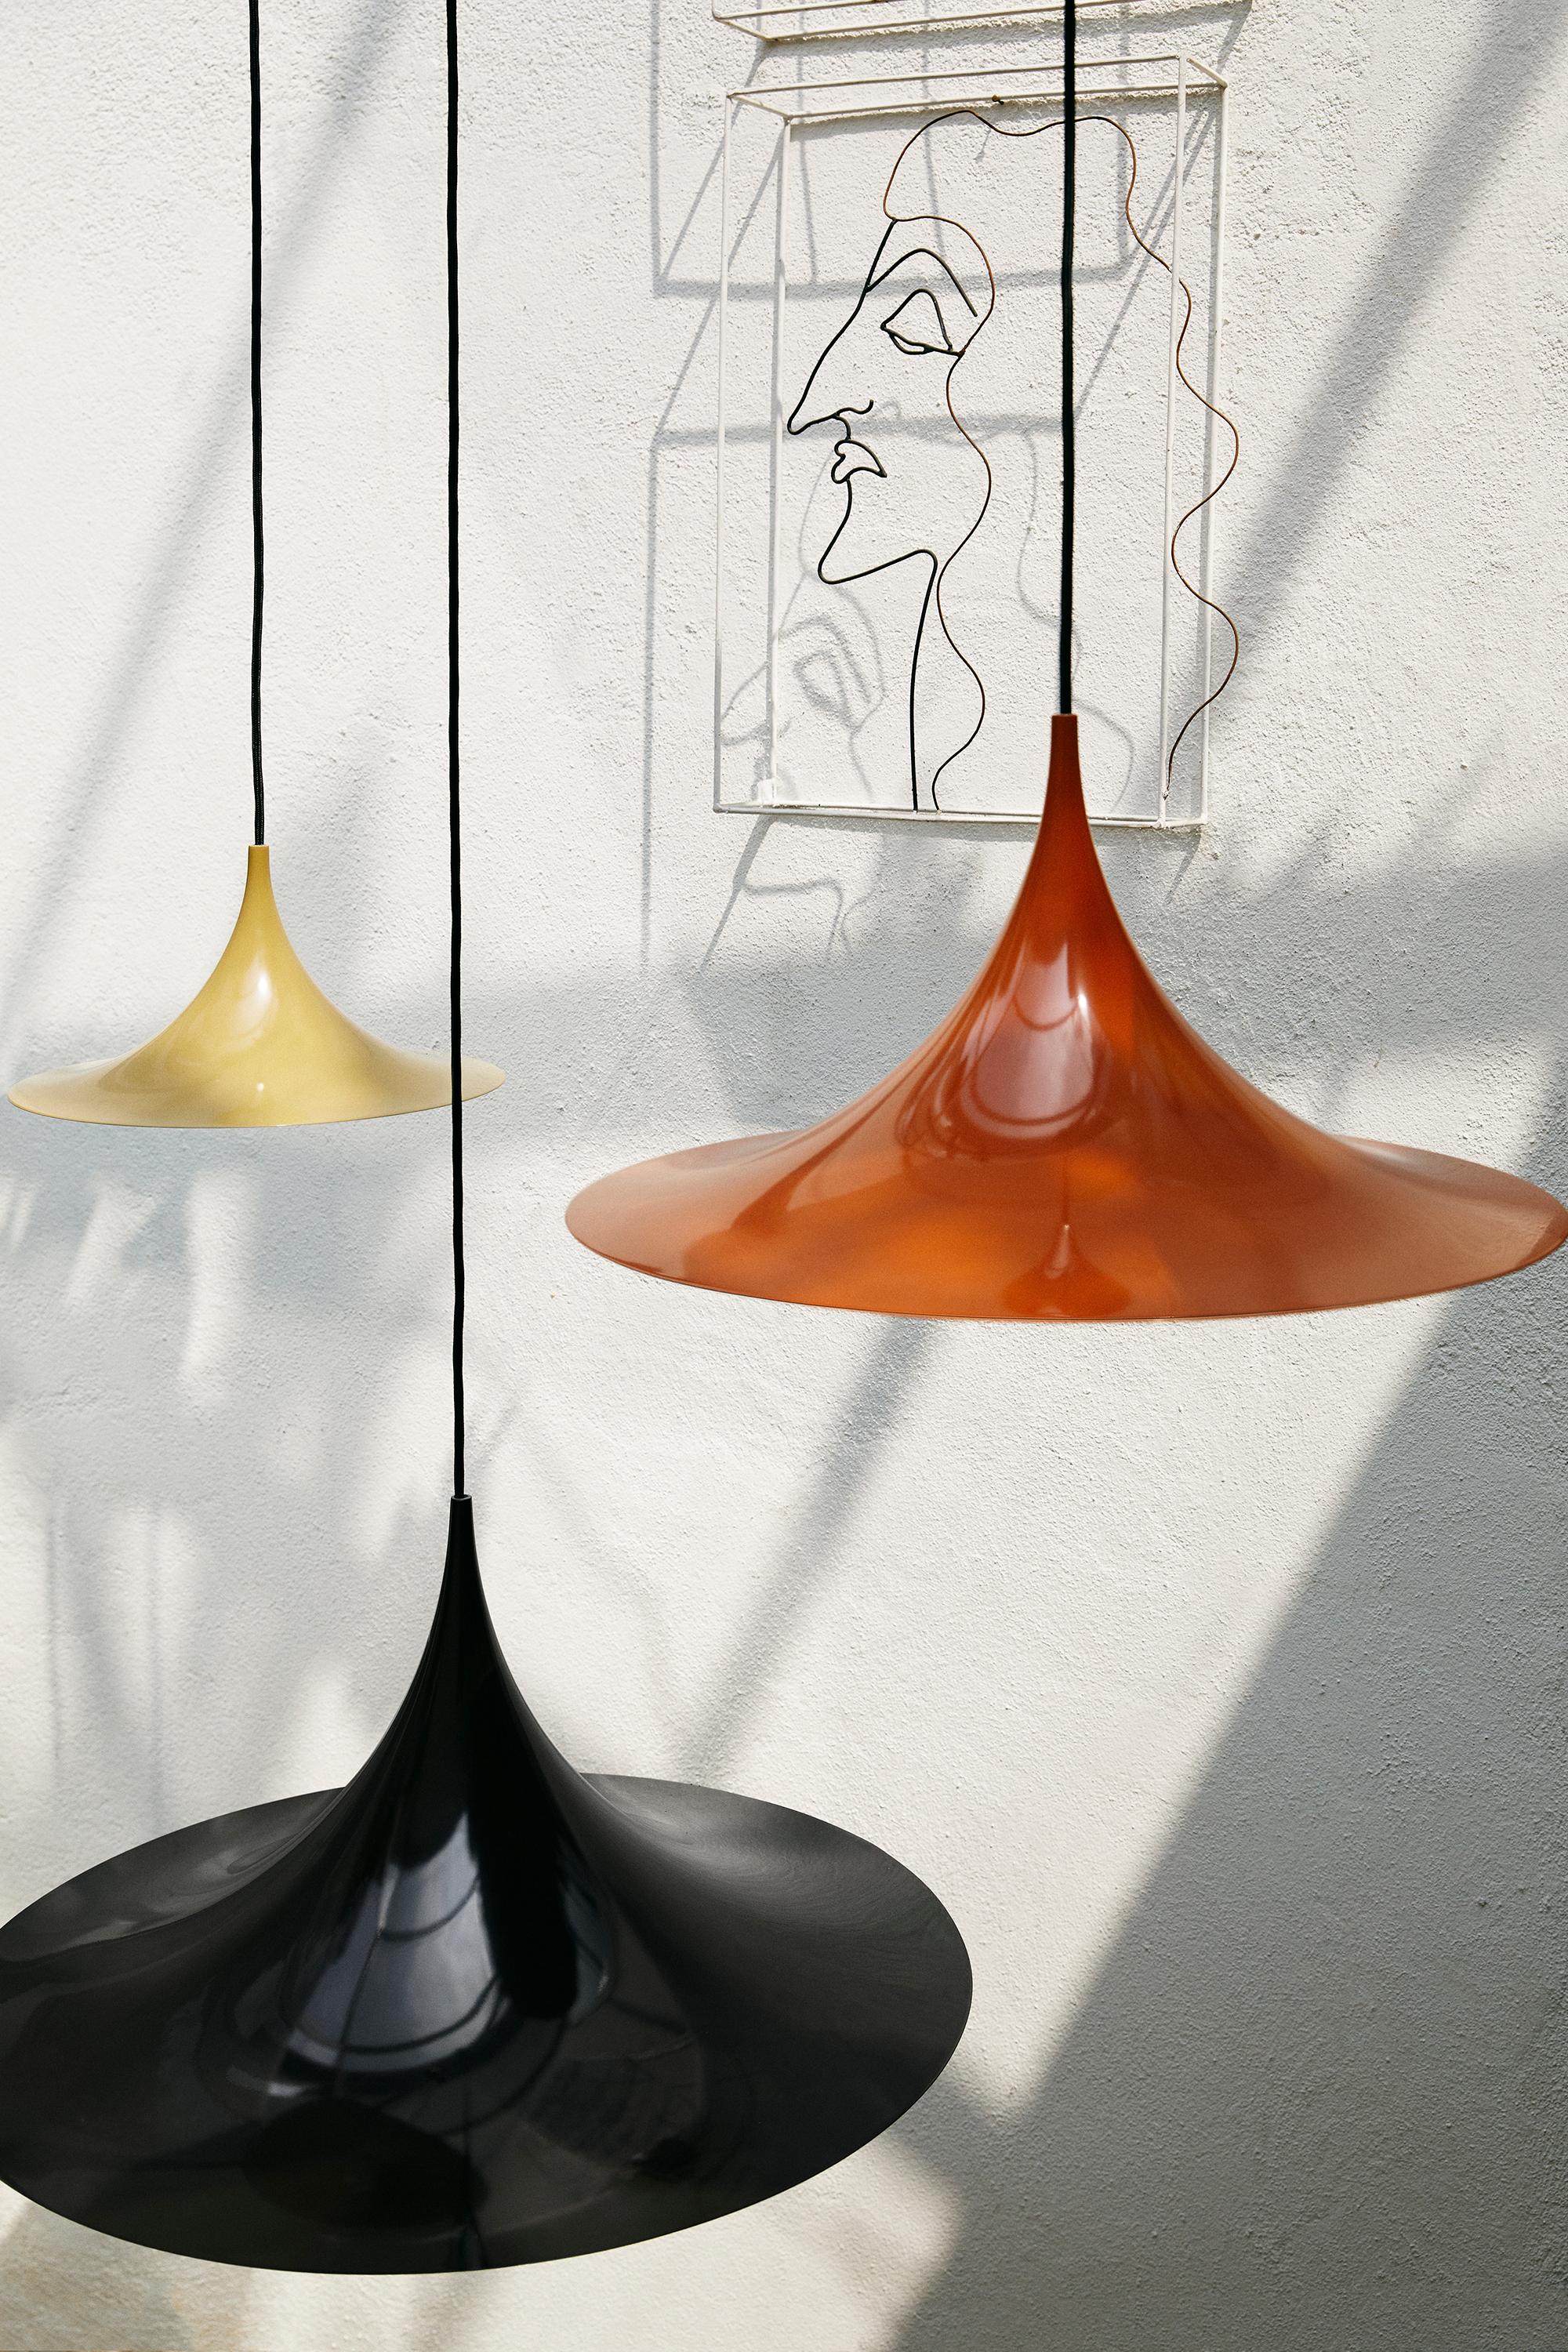 Bonderup And Thorup 'Semi' pendant in Roasted Pumpkin.

Designed in 1968 by Claus Bonderup and Torsten Thorup, this authorized re-edition by GUBI of Denmark meticulously reproduces their work with great attention to detail and materials faithful